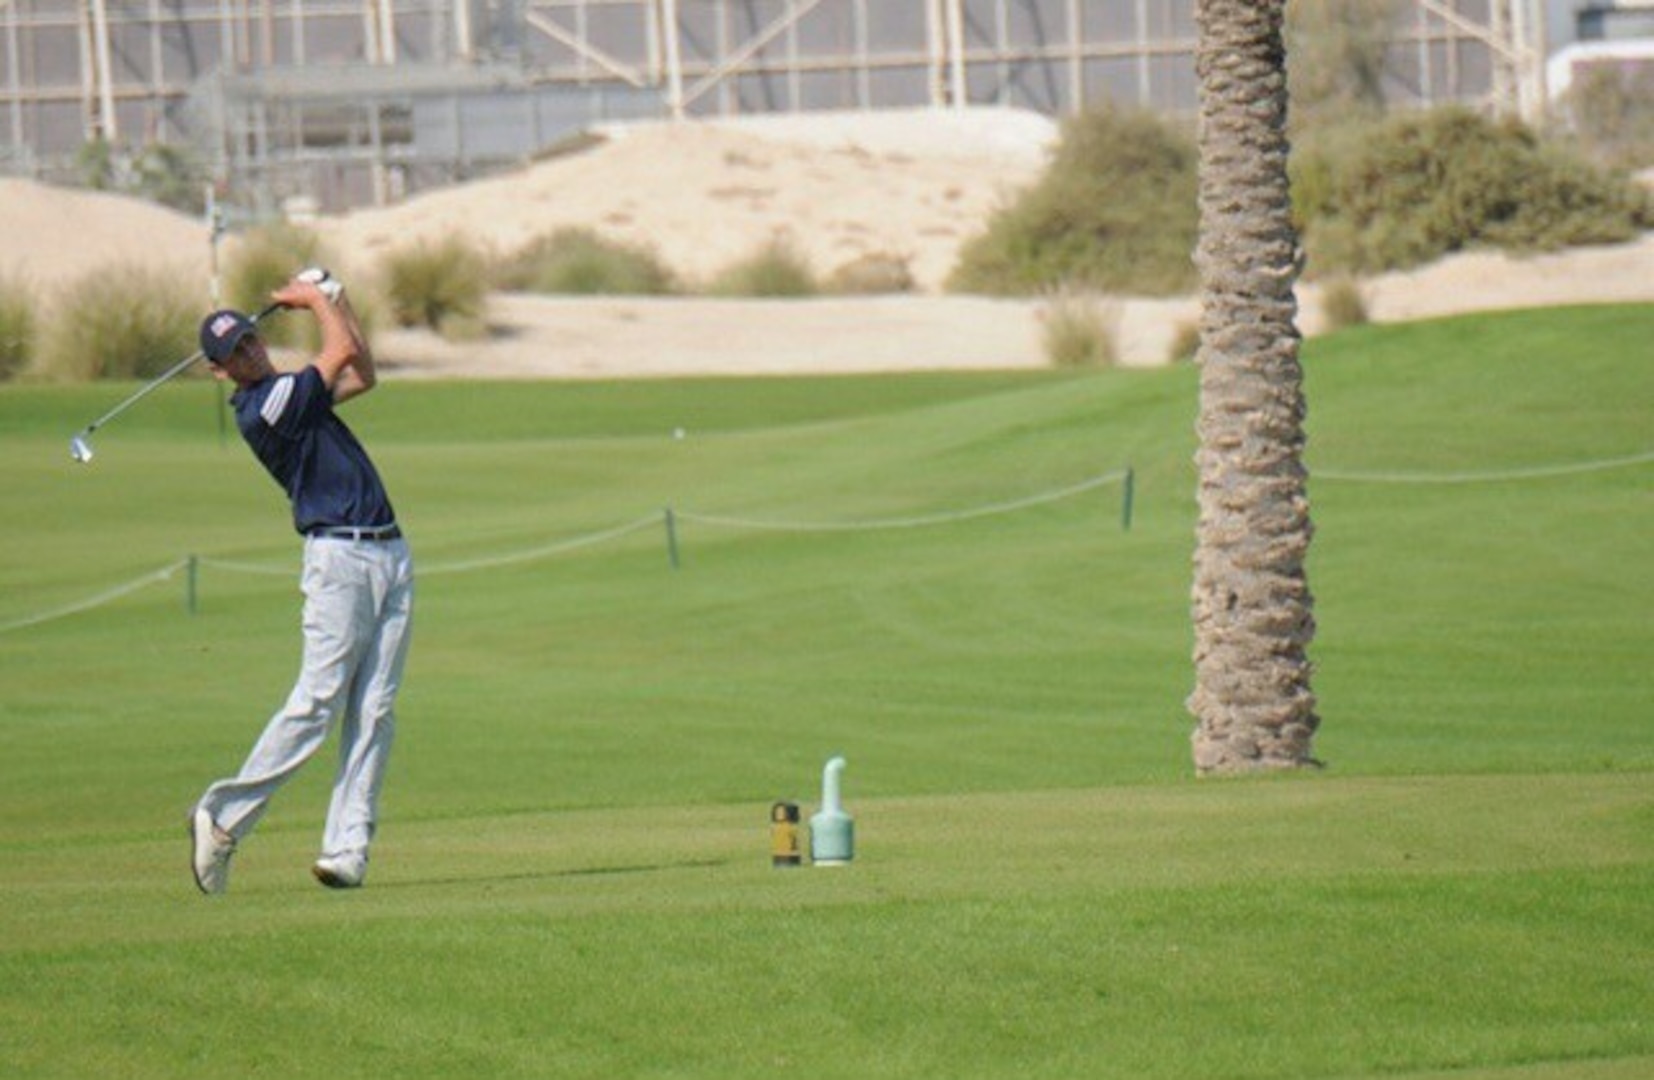 The US Men and Women Armed Forces Golf teams won respective gold medals for the seventh time during the 8th CISM World Military Golf Championship held in Bahrain 13-21 November 2014.